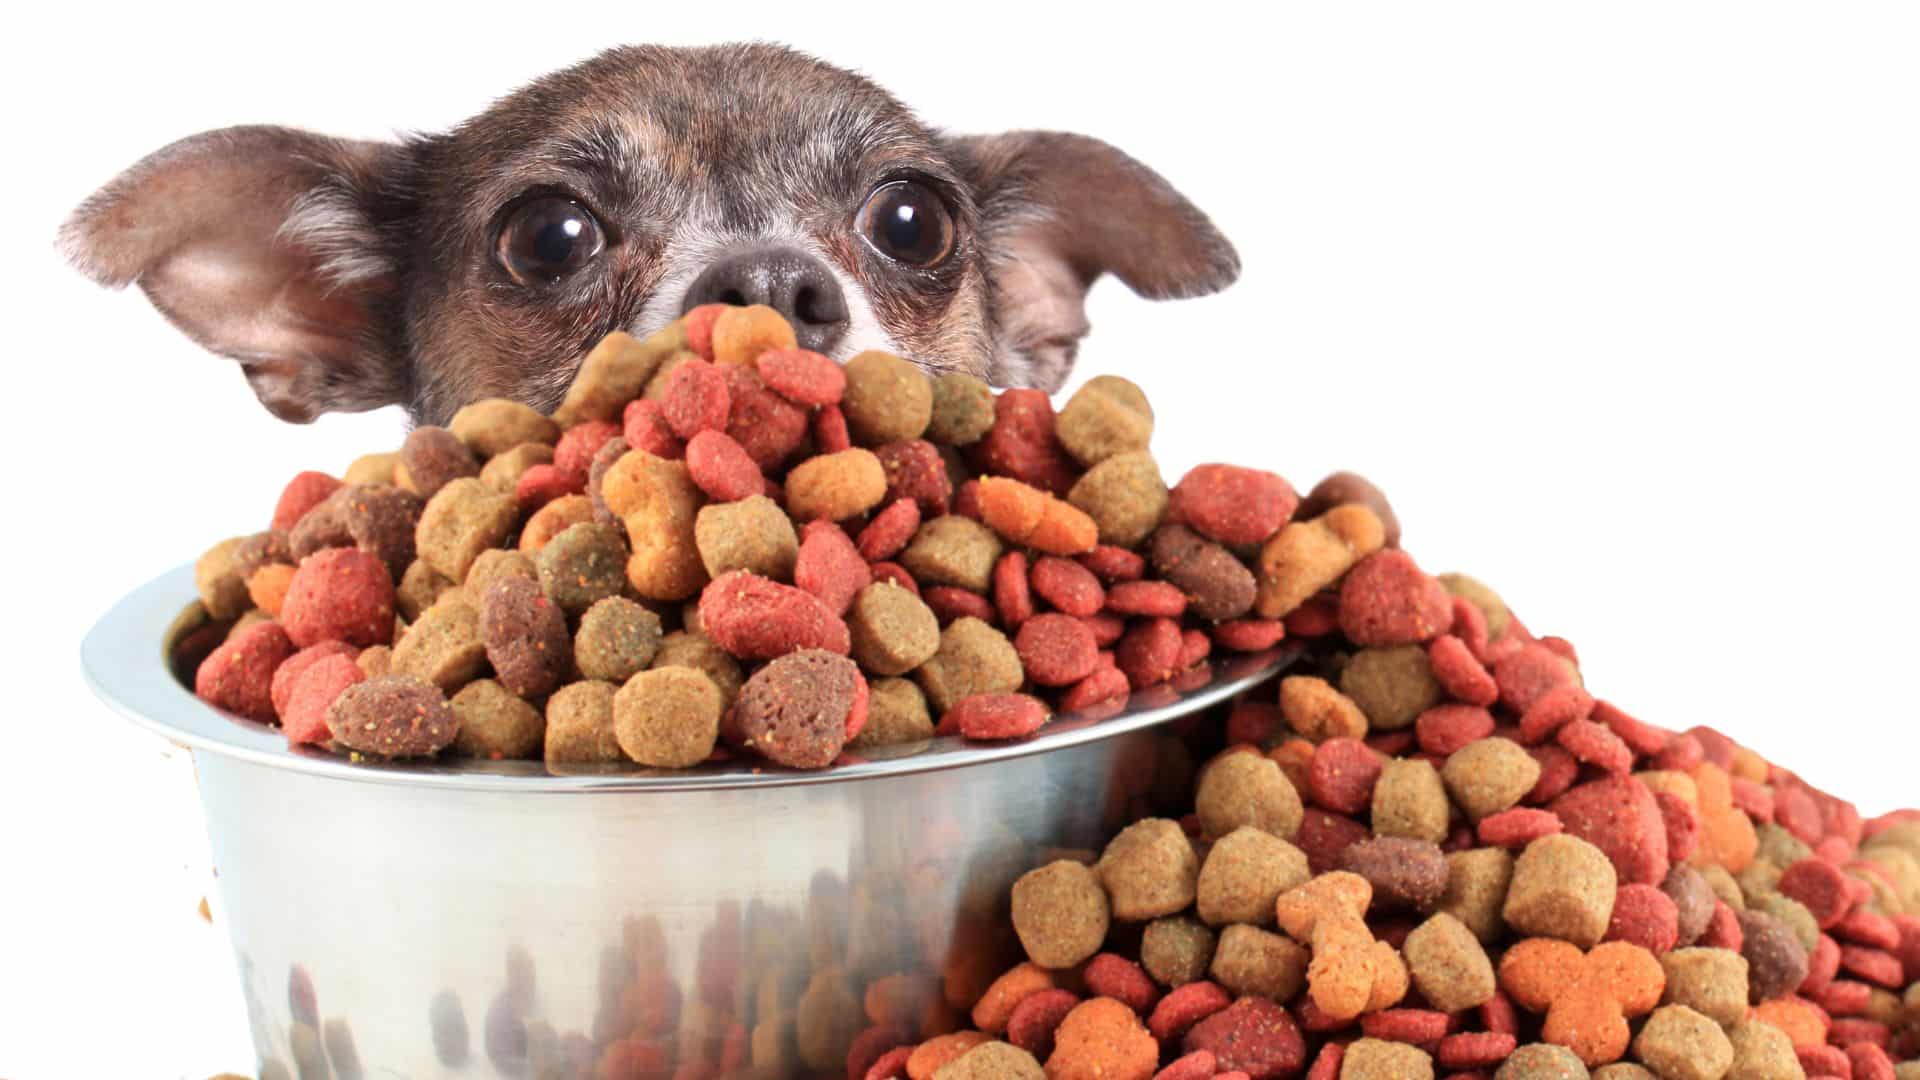 Small breed dogs require especial wet foods with less calories